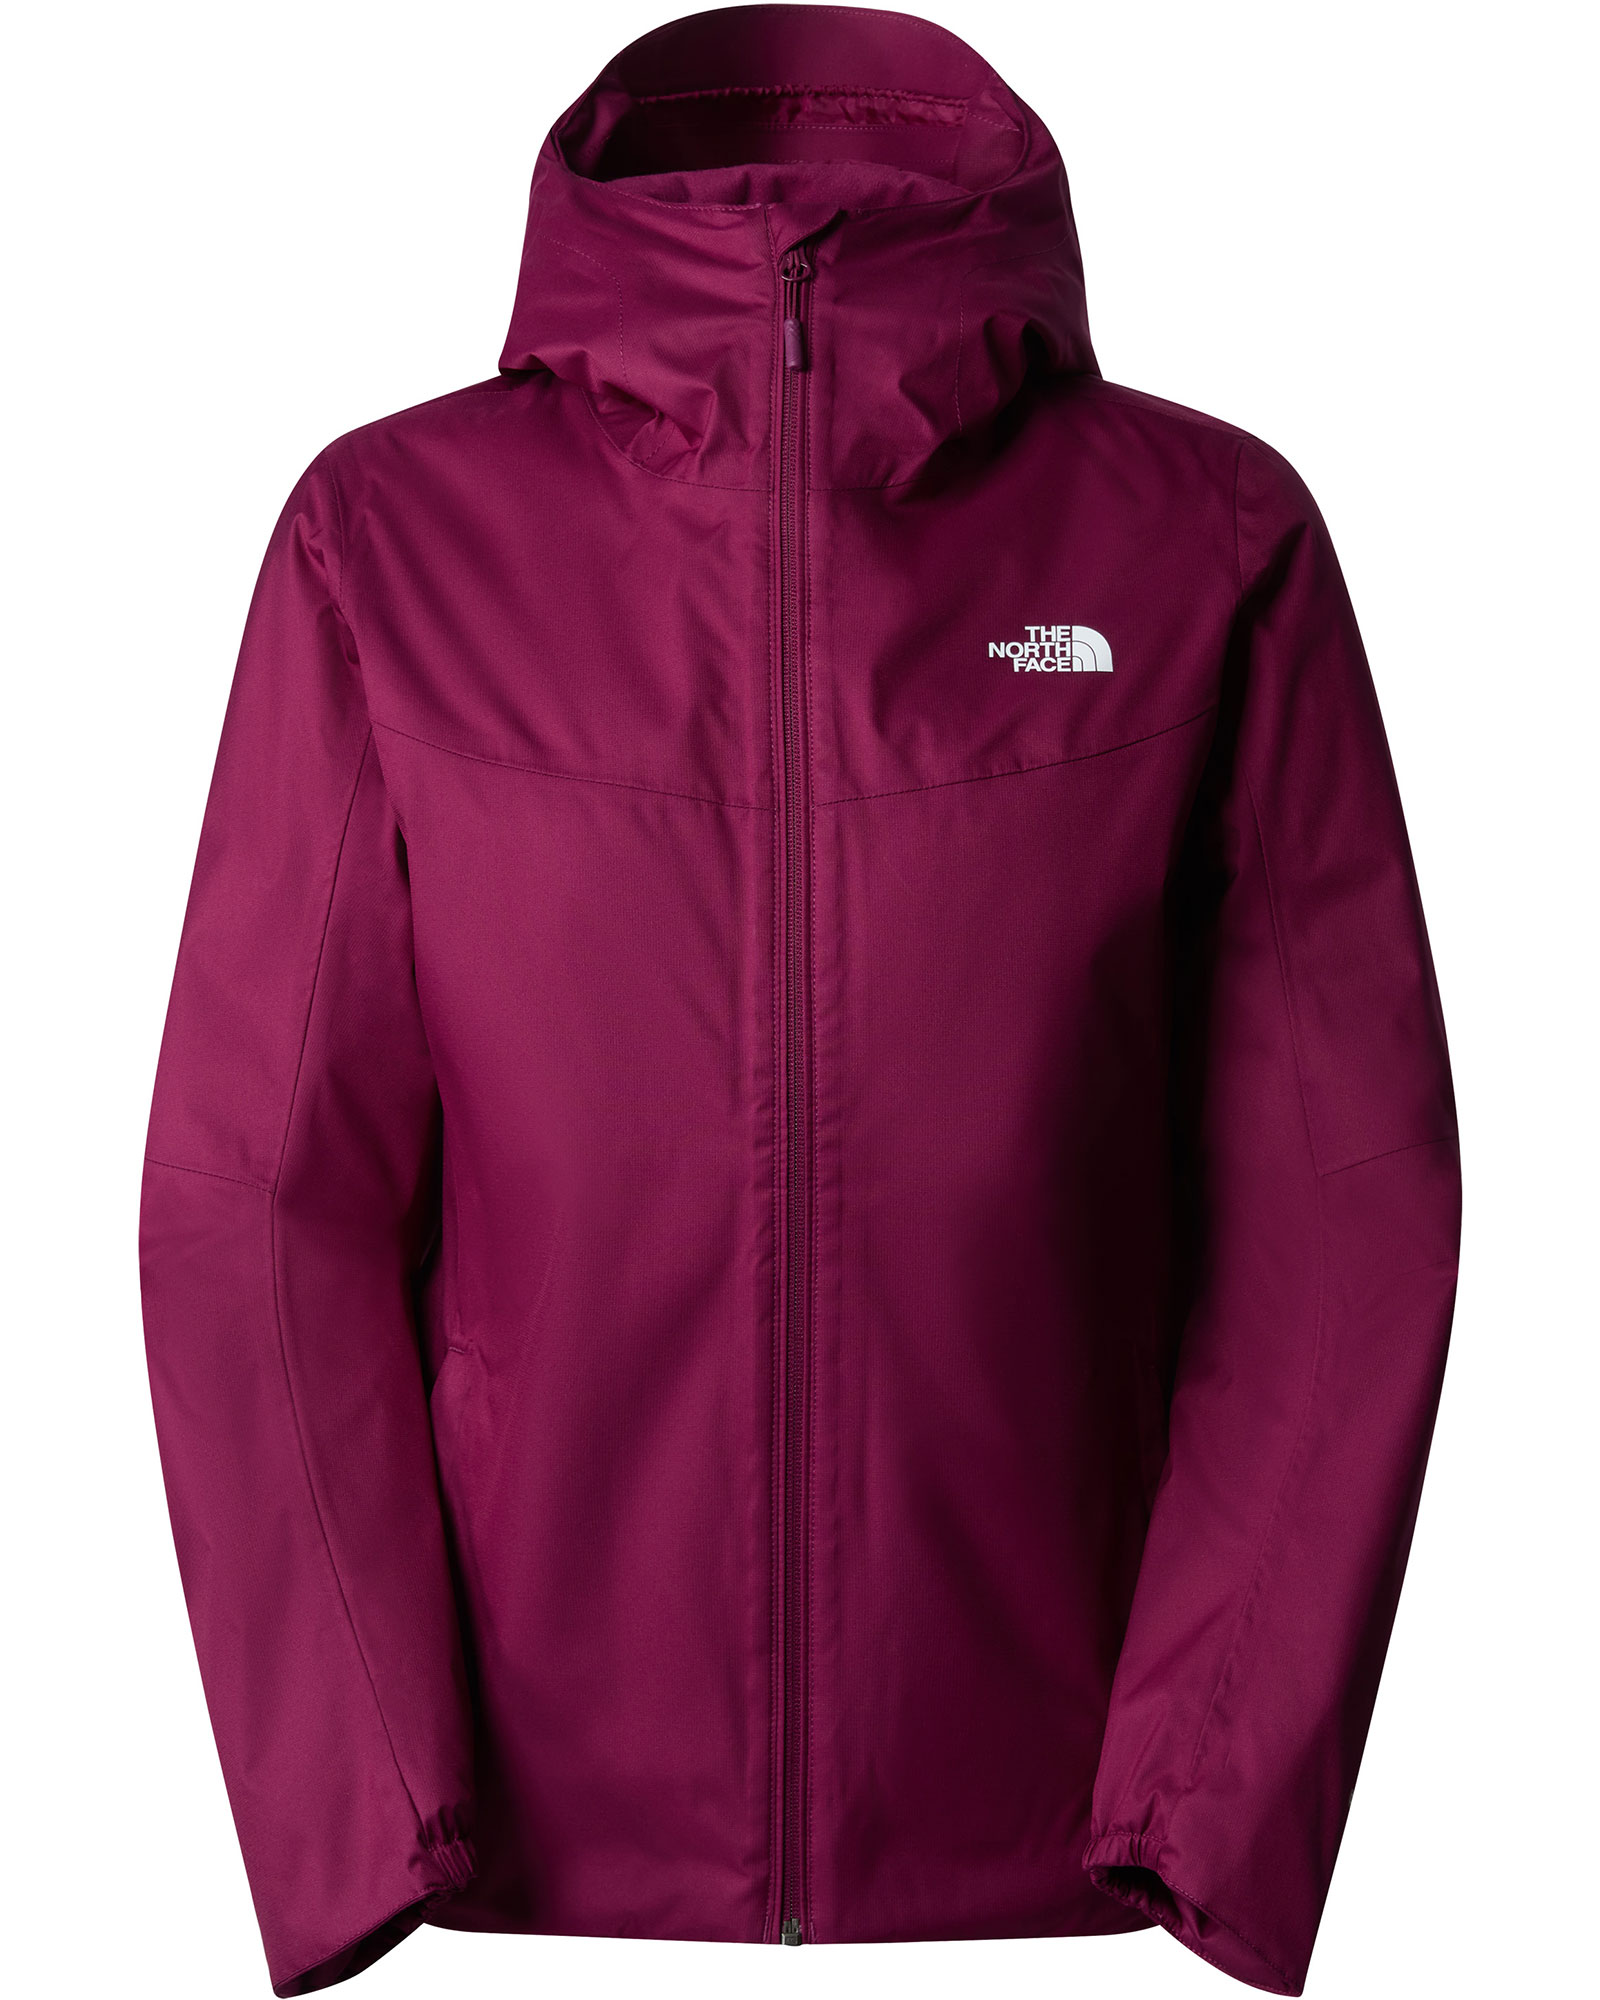 The North Face Quest DryVent Women’s Insulated Jacket - Boysenberry XS